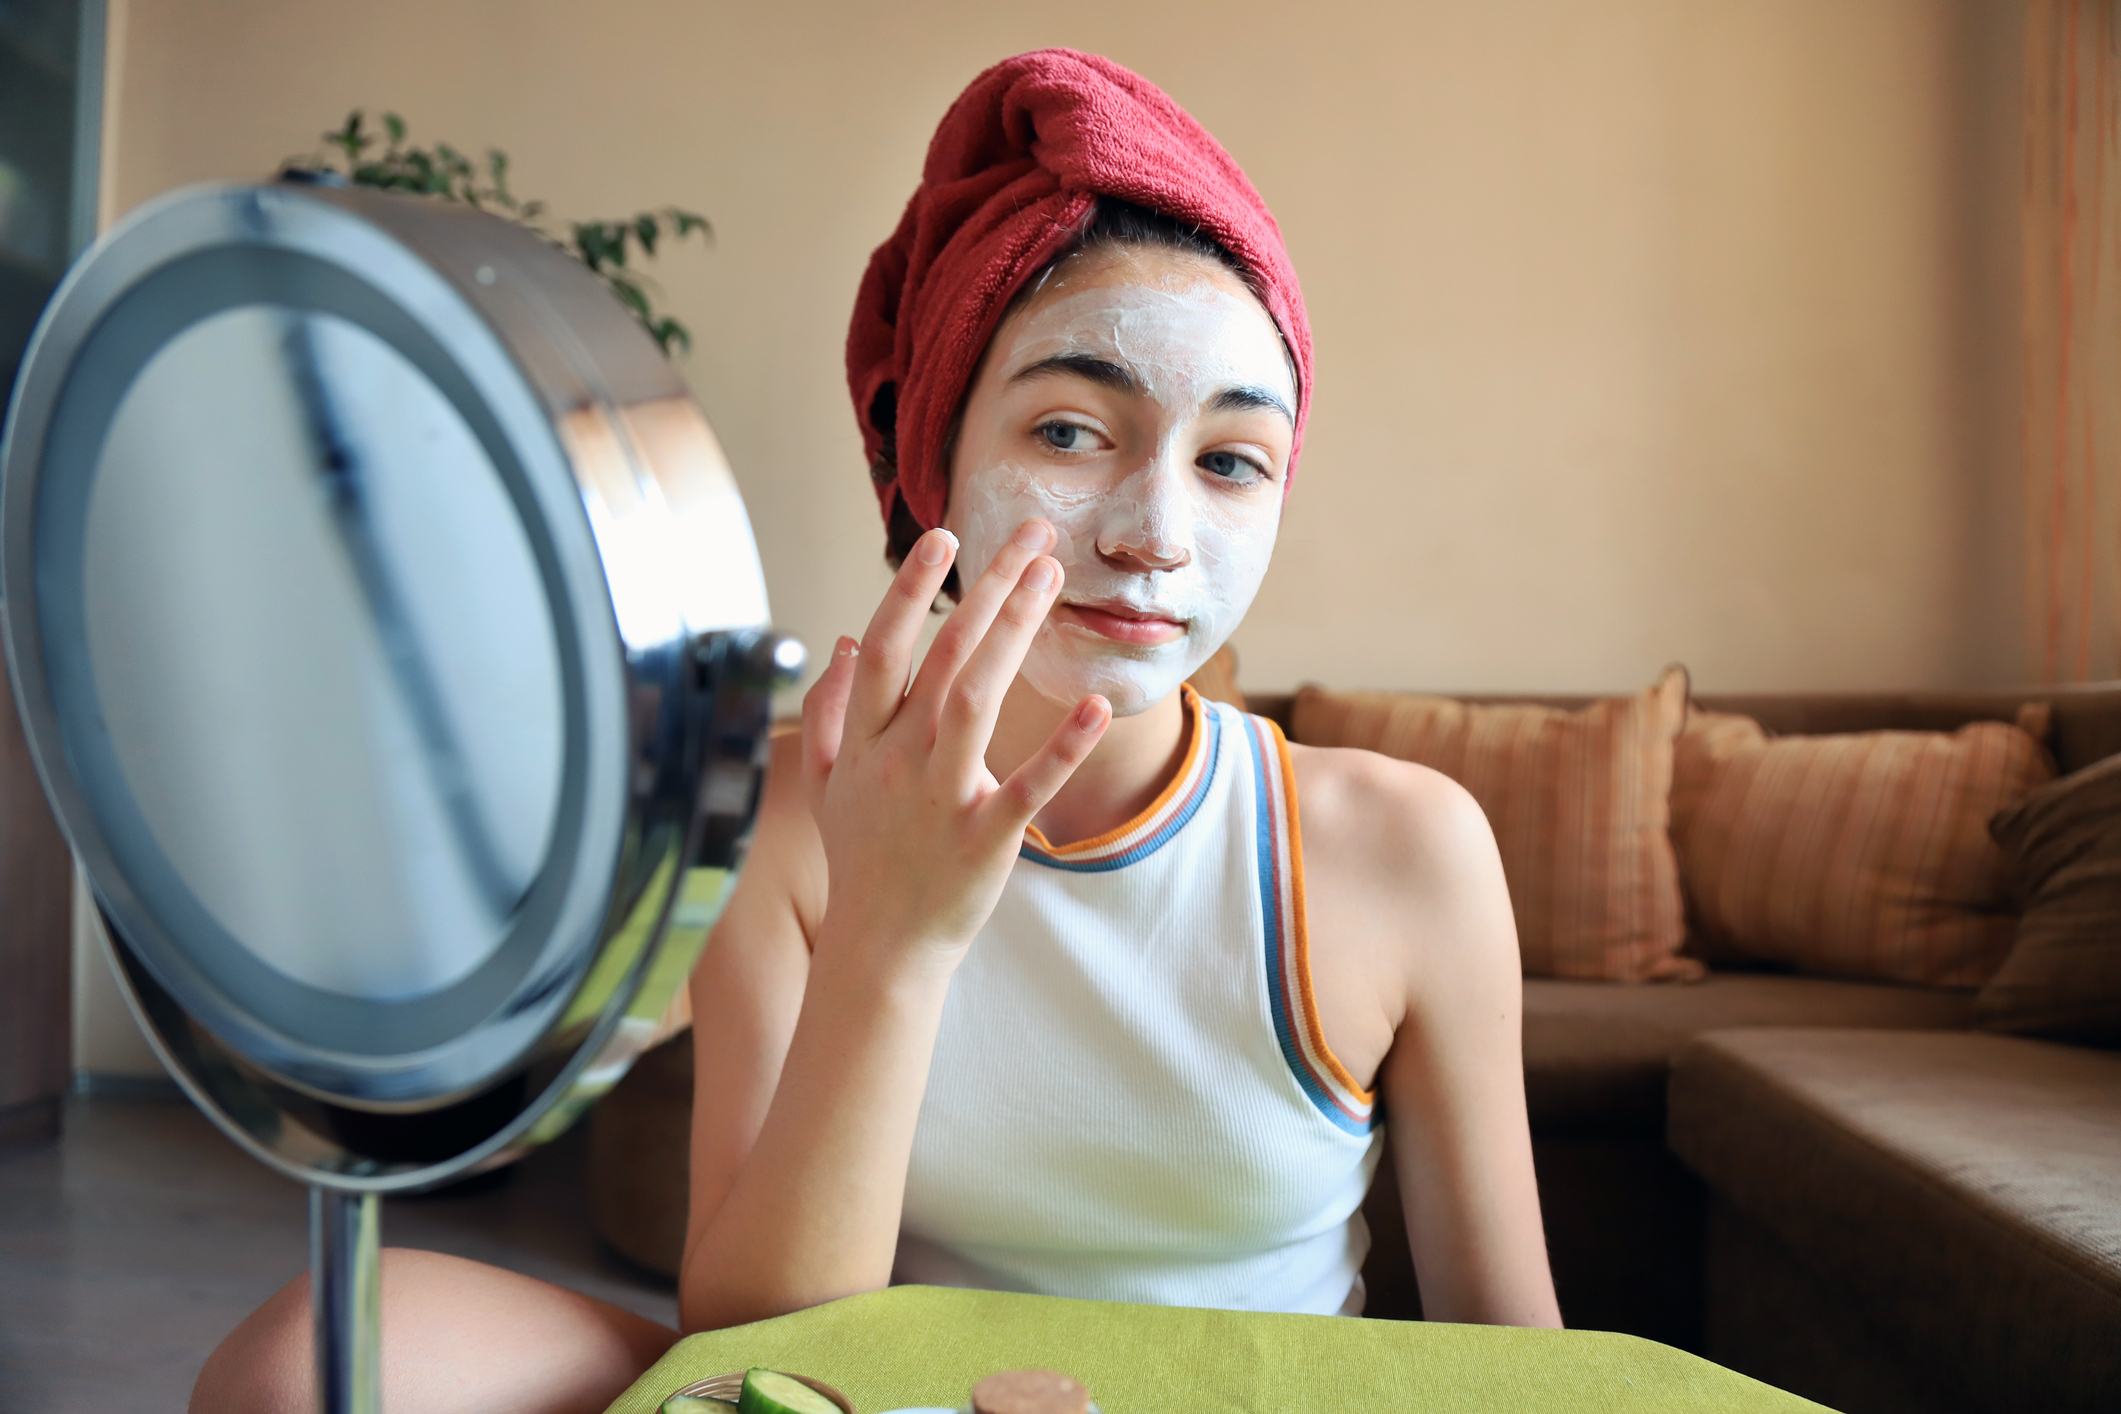 Young person applying a facial mask while looking into a mirror, dressed in casual sleeveless top with towel-wrapped hair